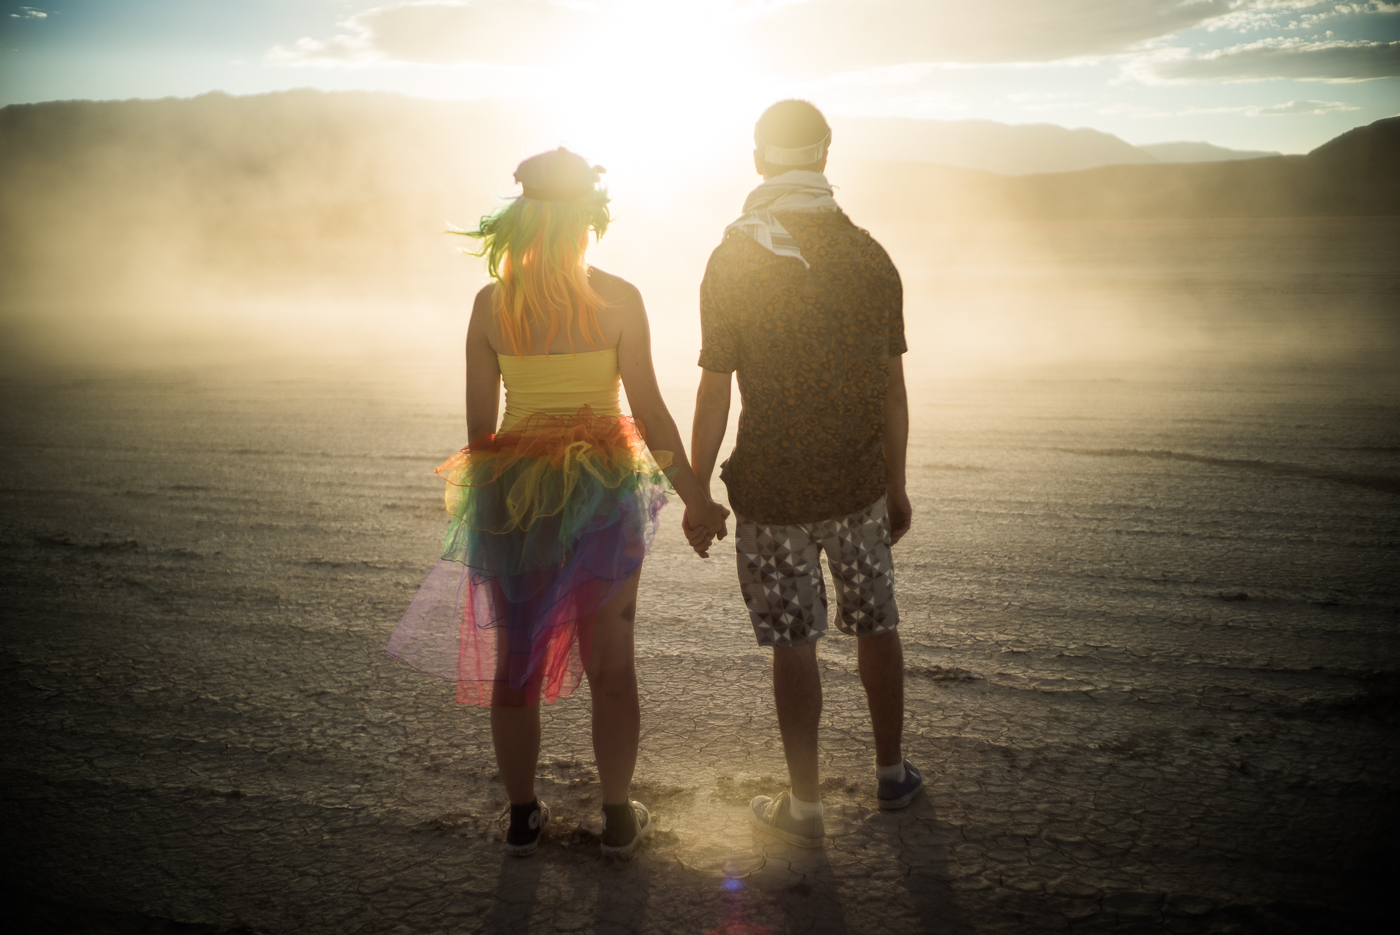 Couple in the Dust, Burning Man 2014: In Dust We Trust - Photos of a Dusty Playa